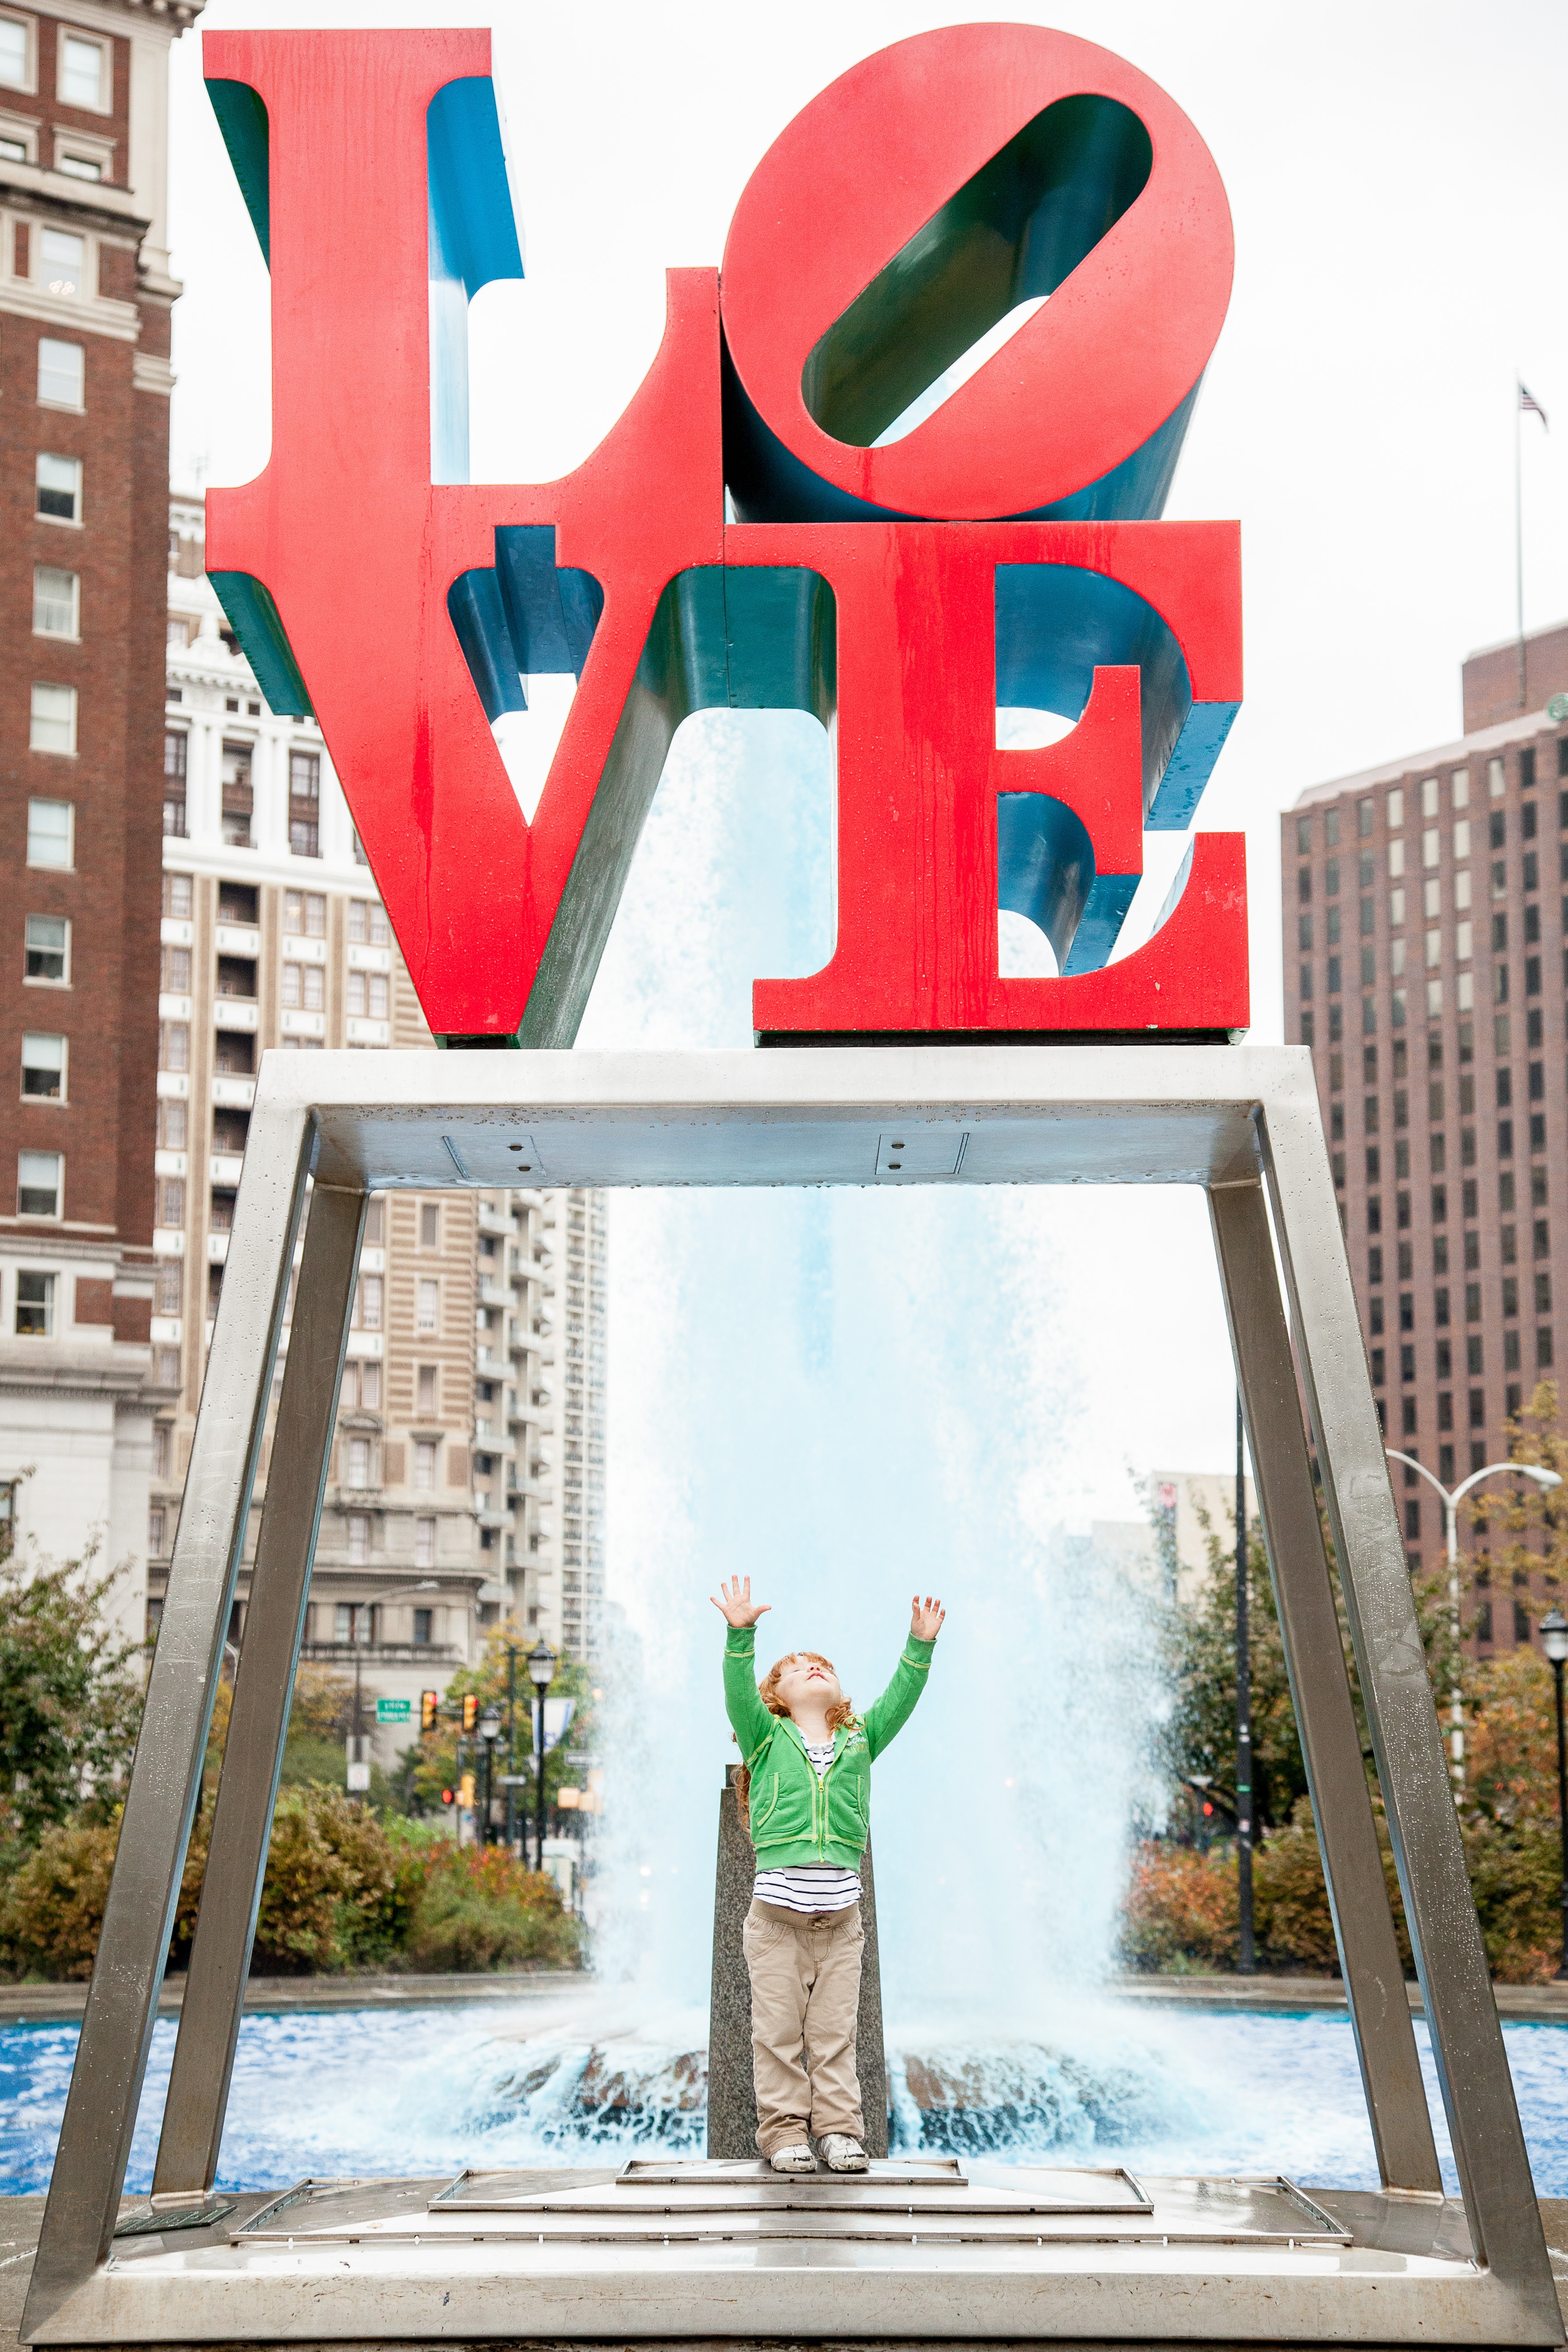 A young girl stands beneath Philadelphia’s iconic “LOVE” statue.